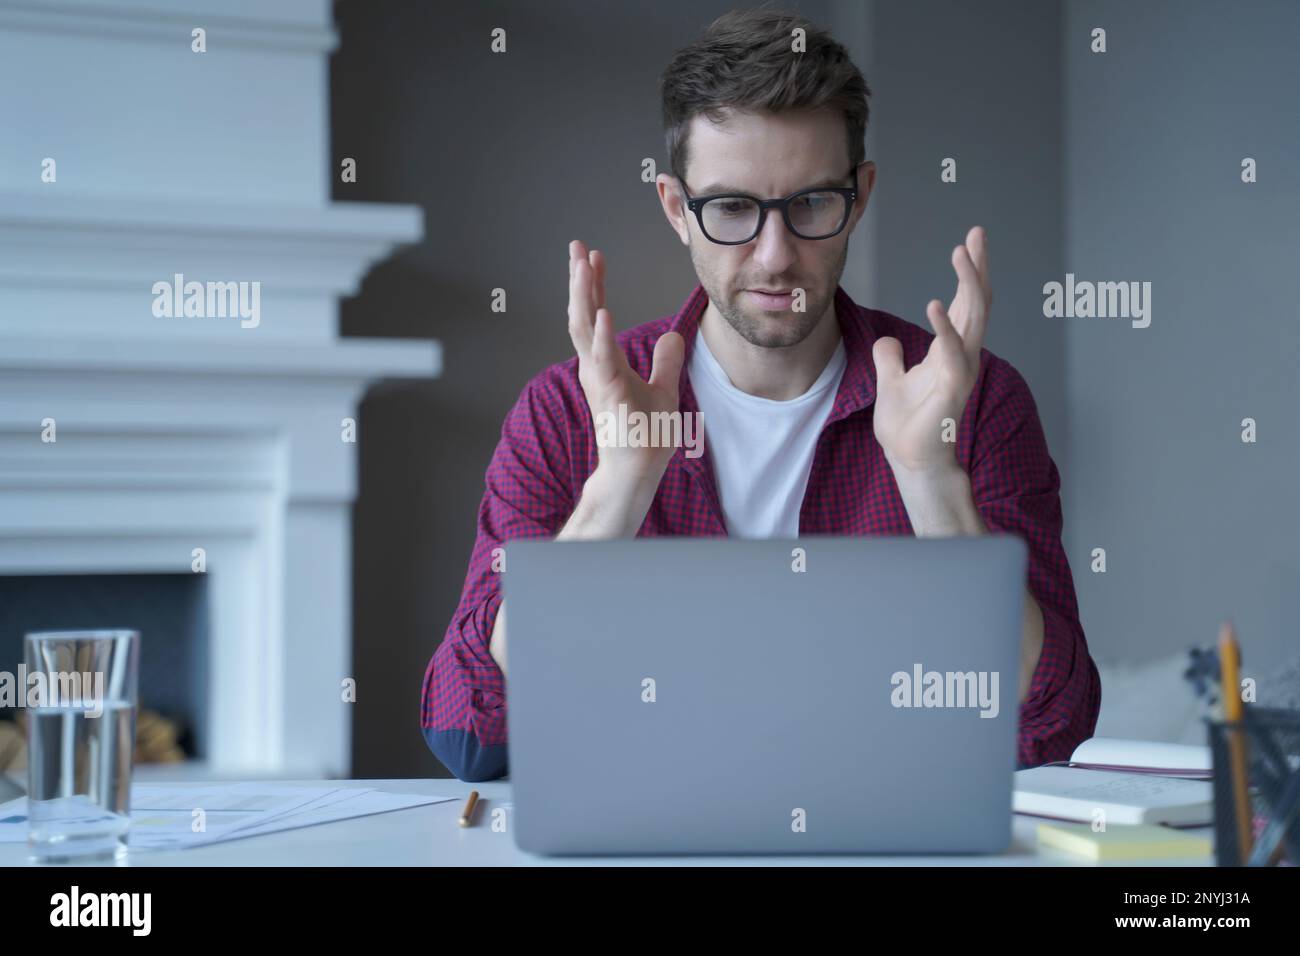 Serious focused man online teacher tutor looking at laptop screen and talking while working remotely from home, dressed in casual clothes. E-learning Stock Photo